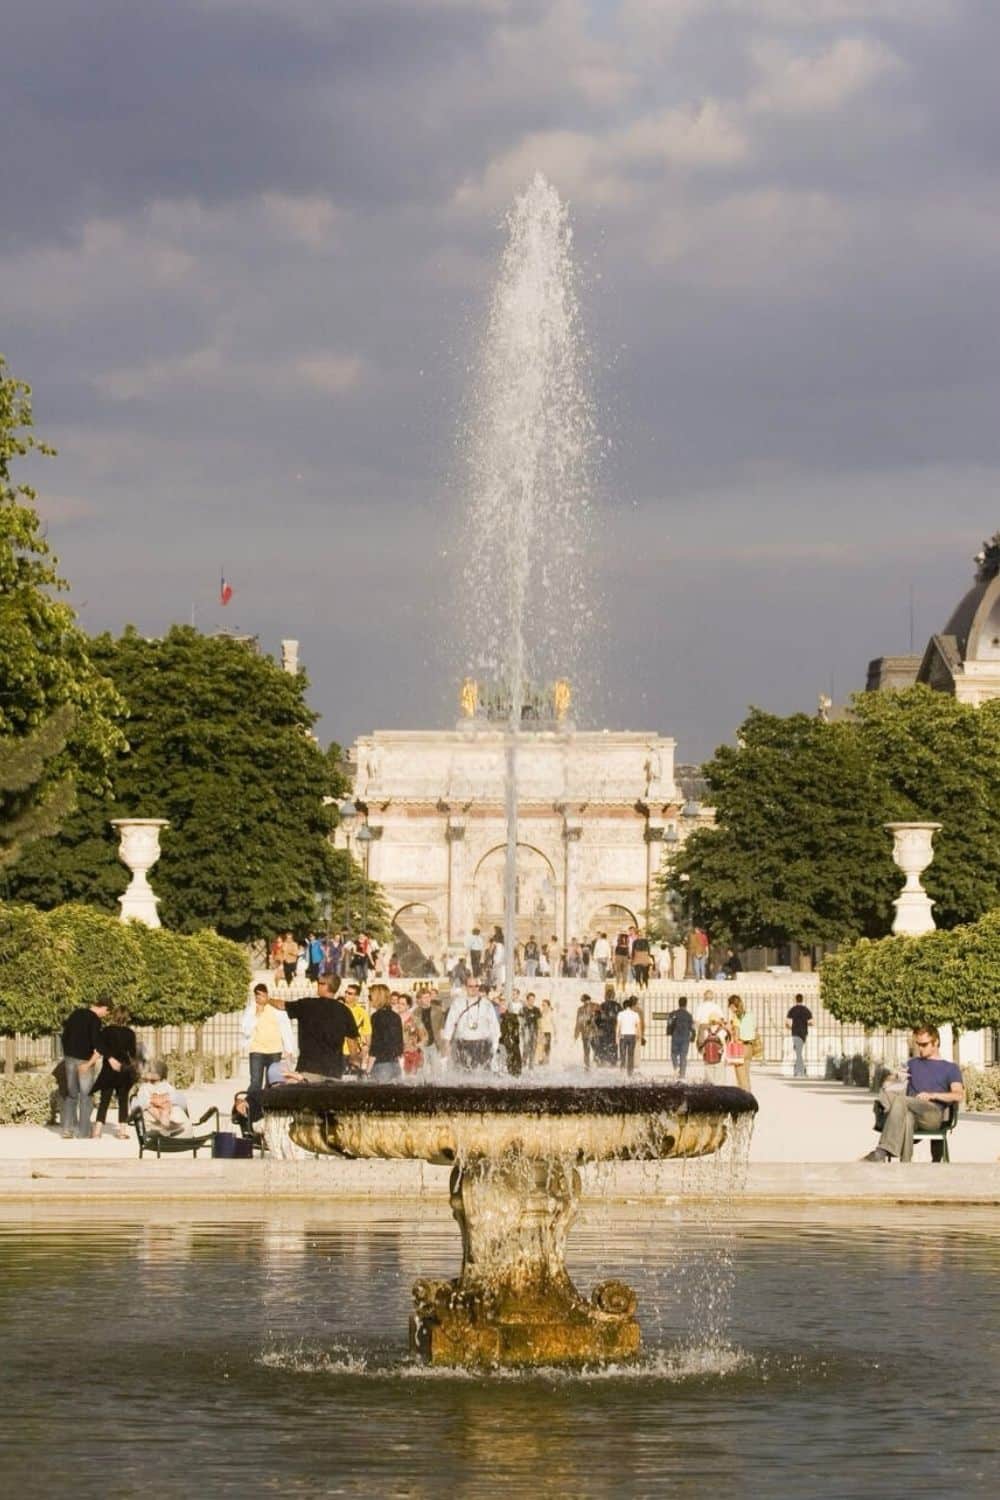 Fountain in the 1st arrondissement of Paris with water spraying into the air, surrounded by lush greenery and people walking and relaxing, with historic architecture in the background under a partly cloudy sky.